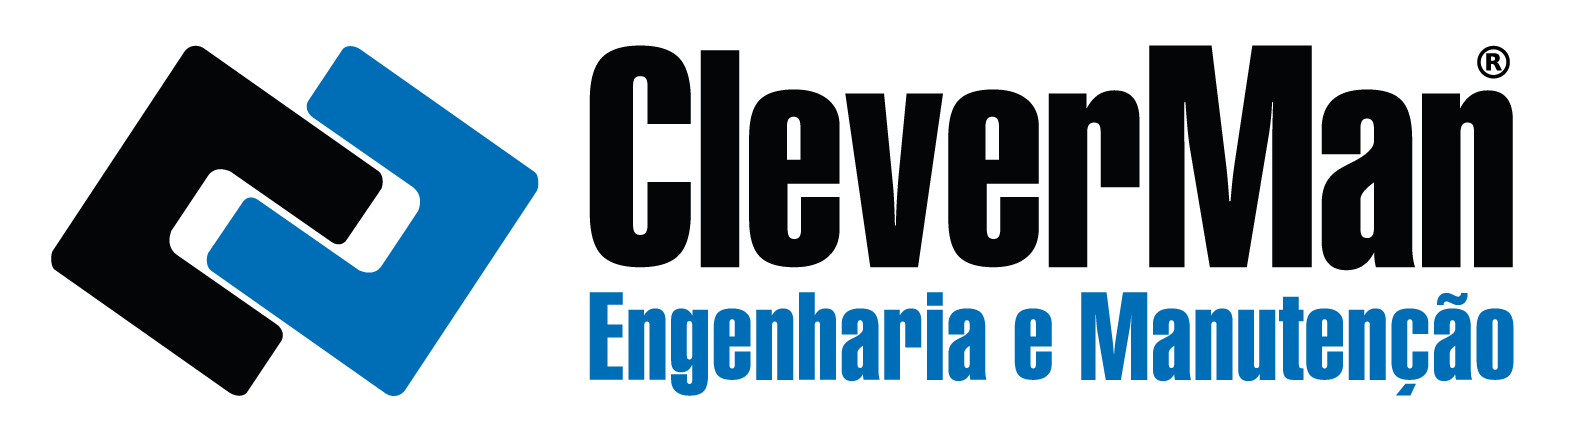 CleverMan